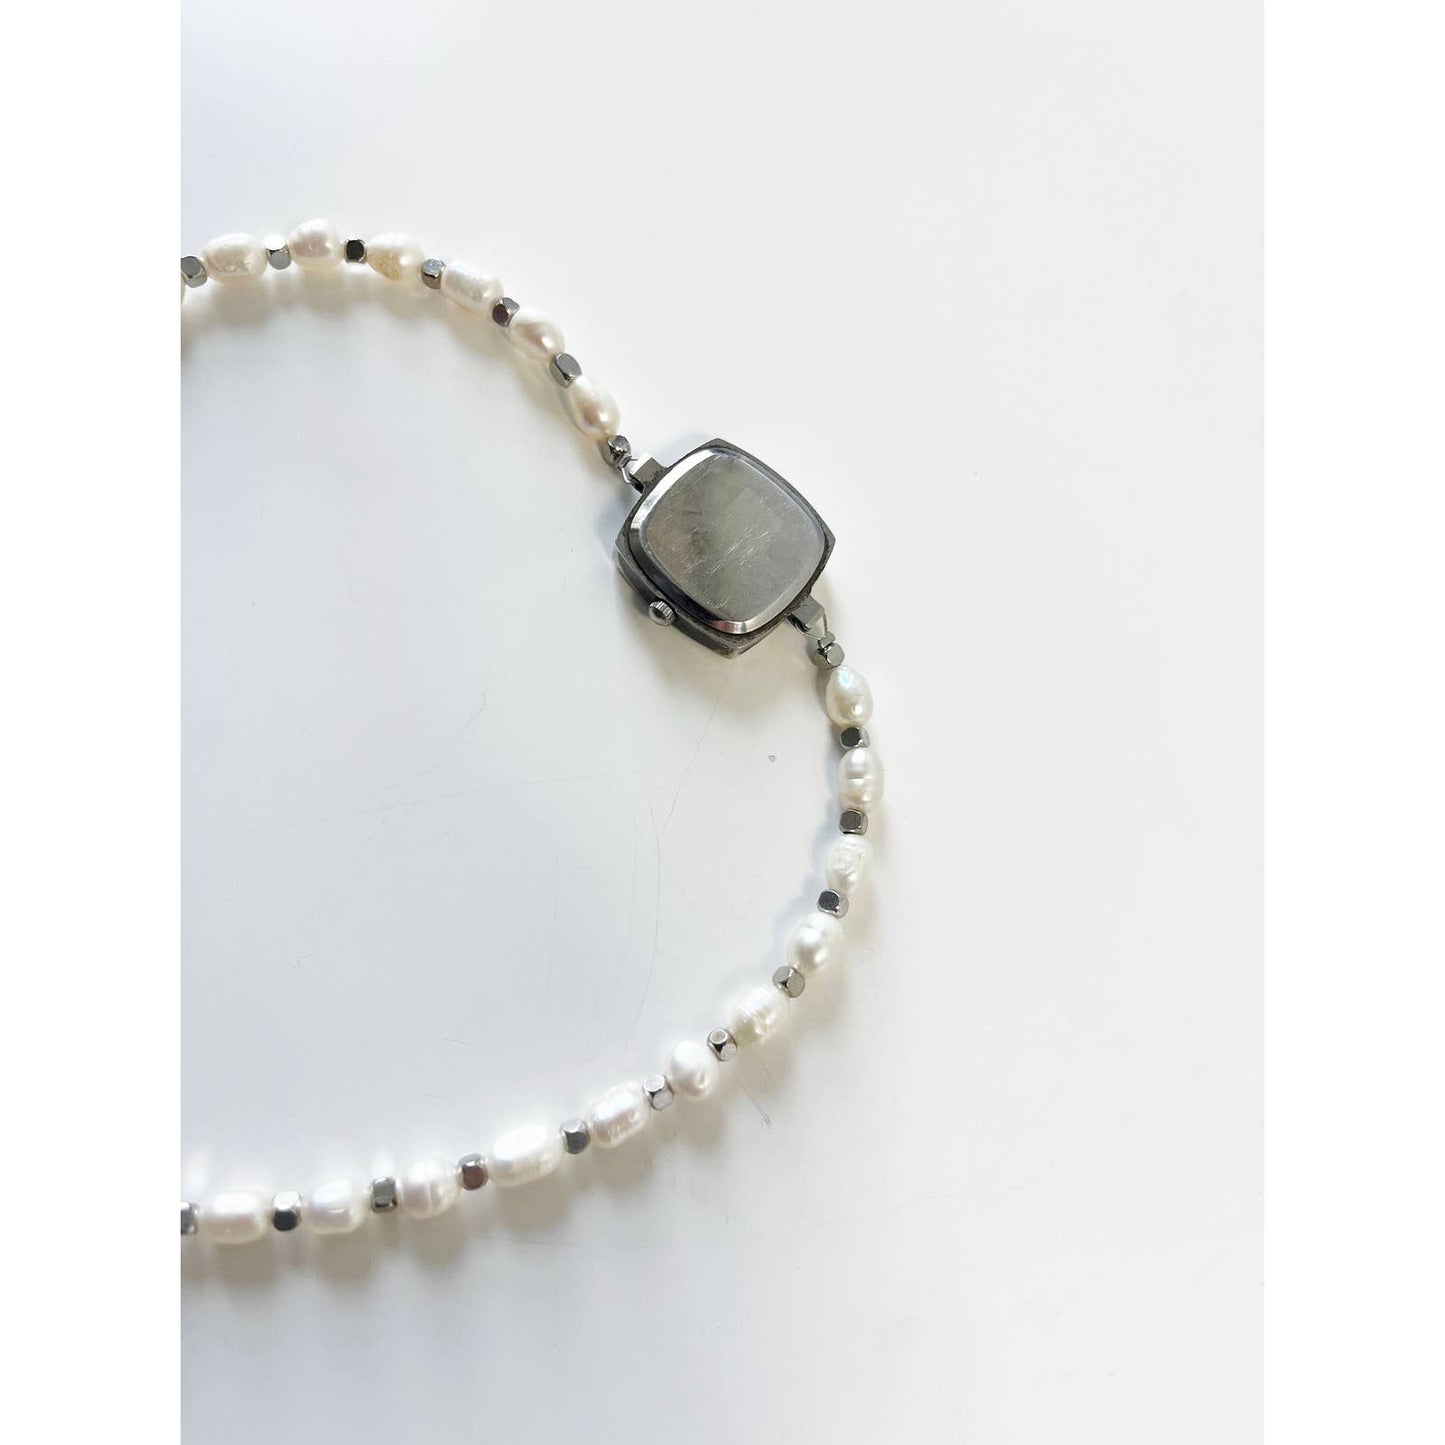 Watch Necklace | Vintage One of a Kind Watch Choker with Pearls Silver Details